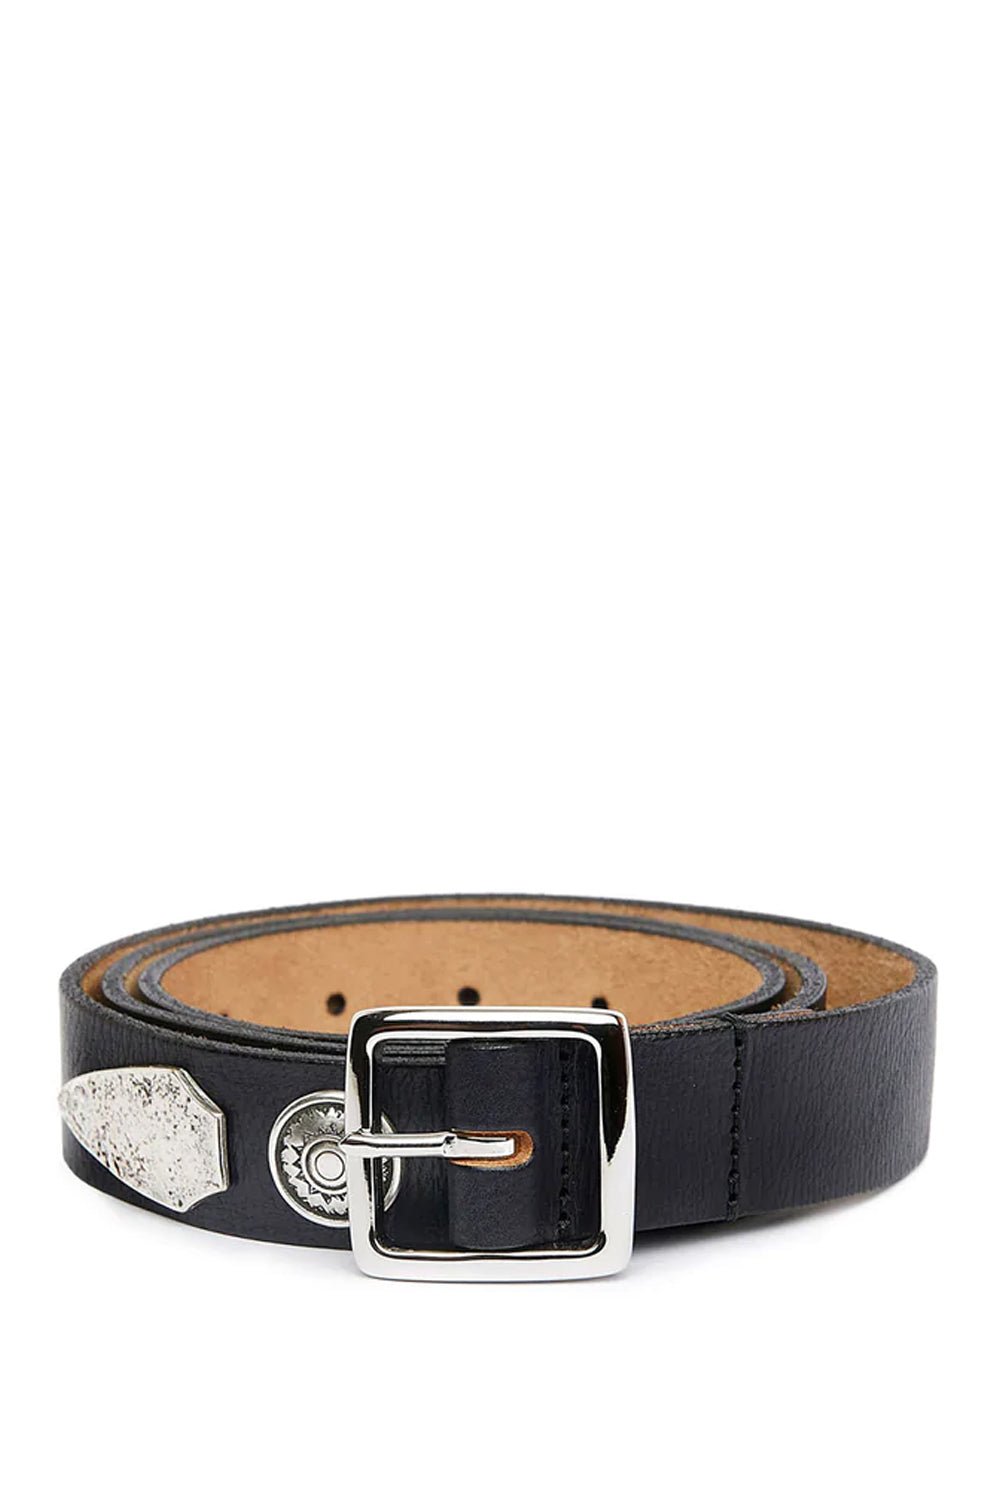 PEYOTE BELT Leather belt with metallic applications. Height: 3 cm HTC LOS ANGELES